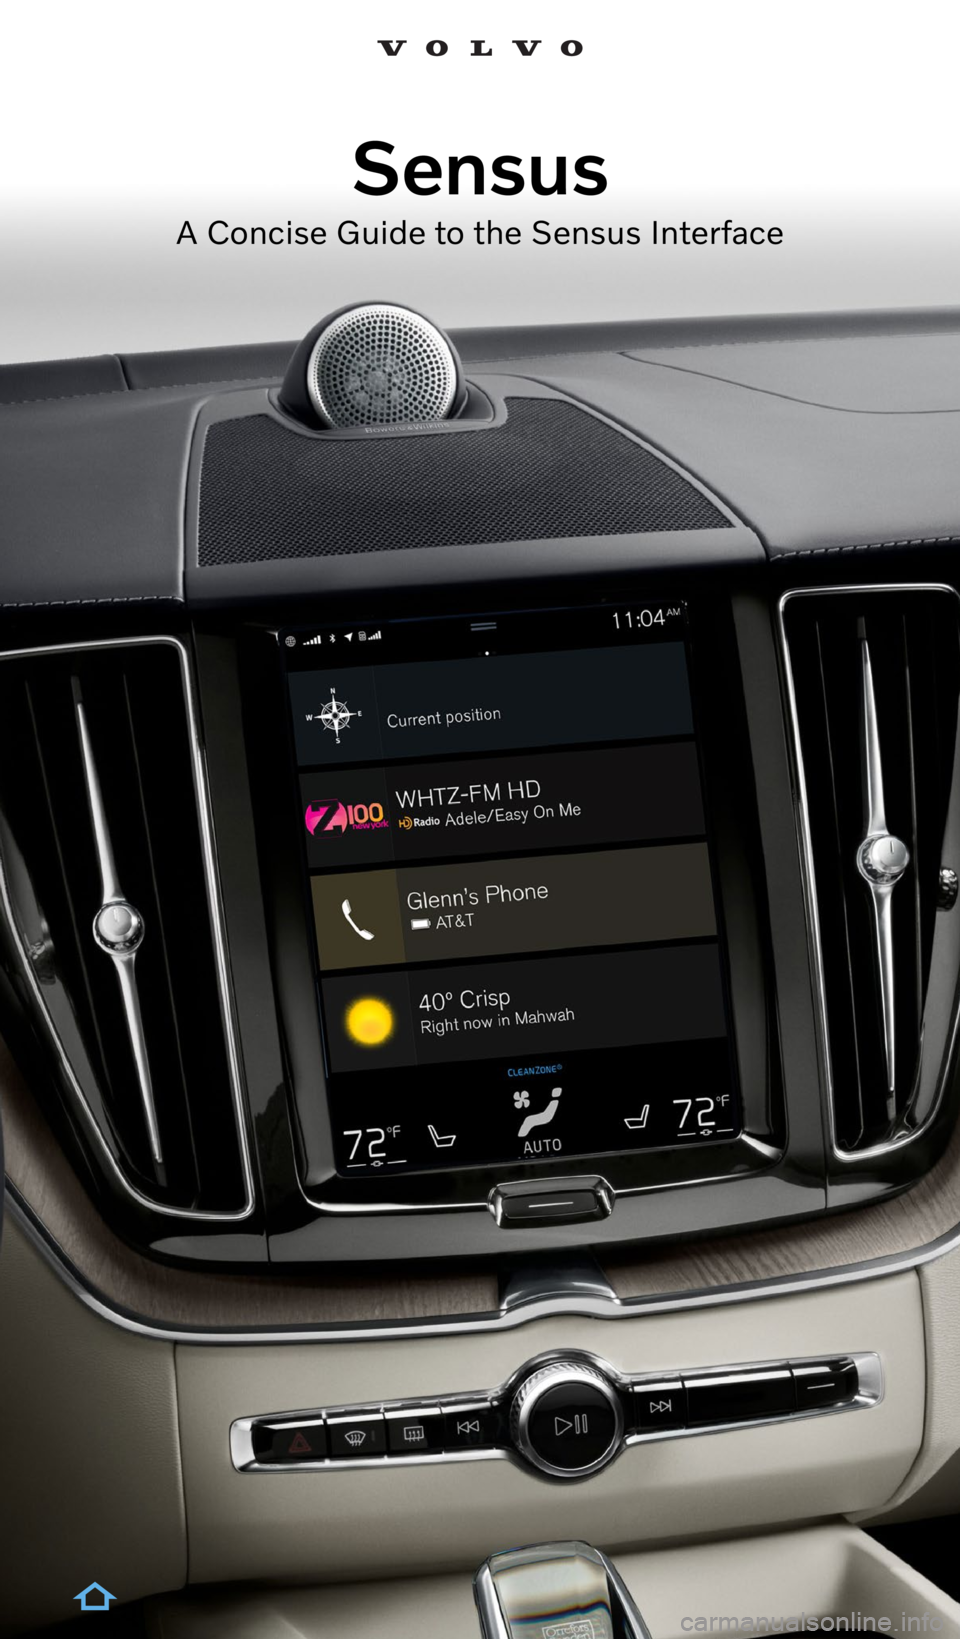 VOLVO XC90 2022  Sensus Digital Guide Sensus
A Concise Guide to the Sensus Interface  